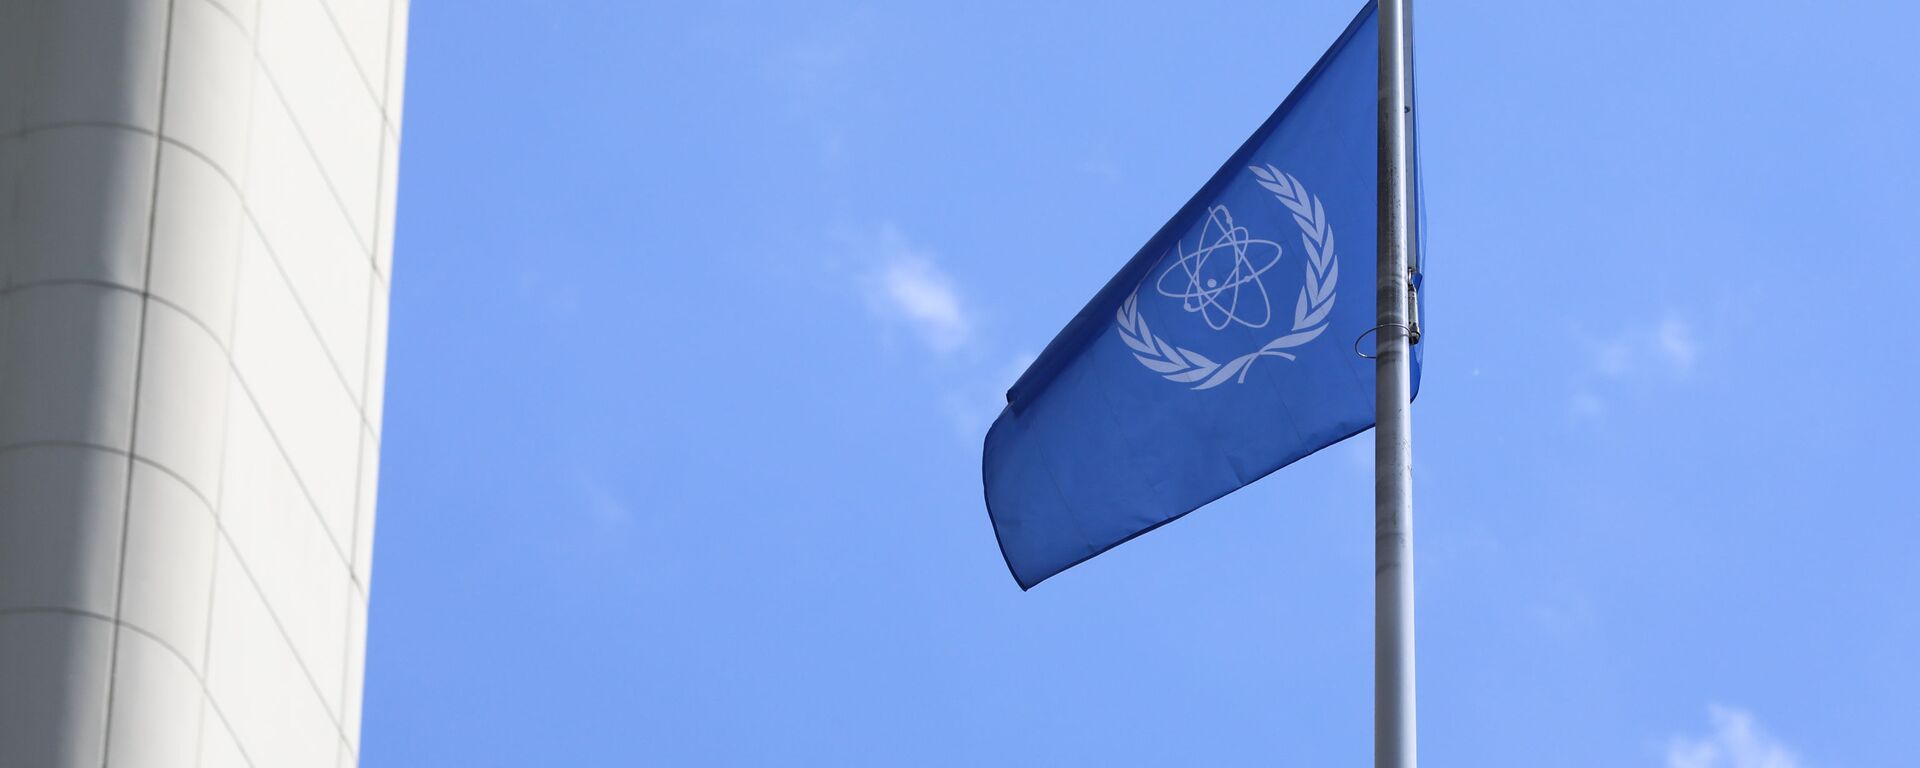 The flag of the International Atomic Energy Agency, IAEA waves at the entrance of the Vienna International Center in Vienna, Austria, Monday, June 7, 2021. - Sputnik International, 1920, 12.06.2021